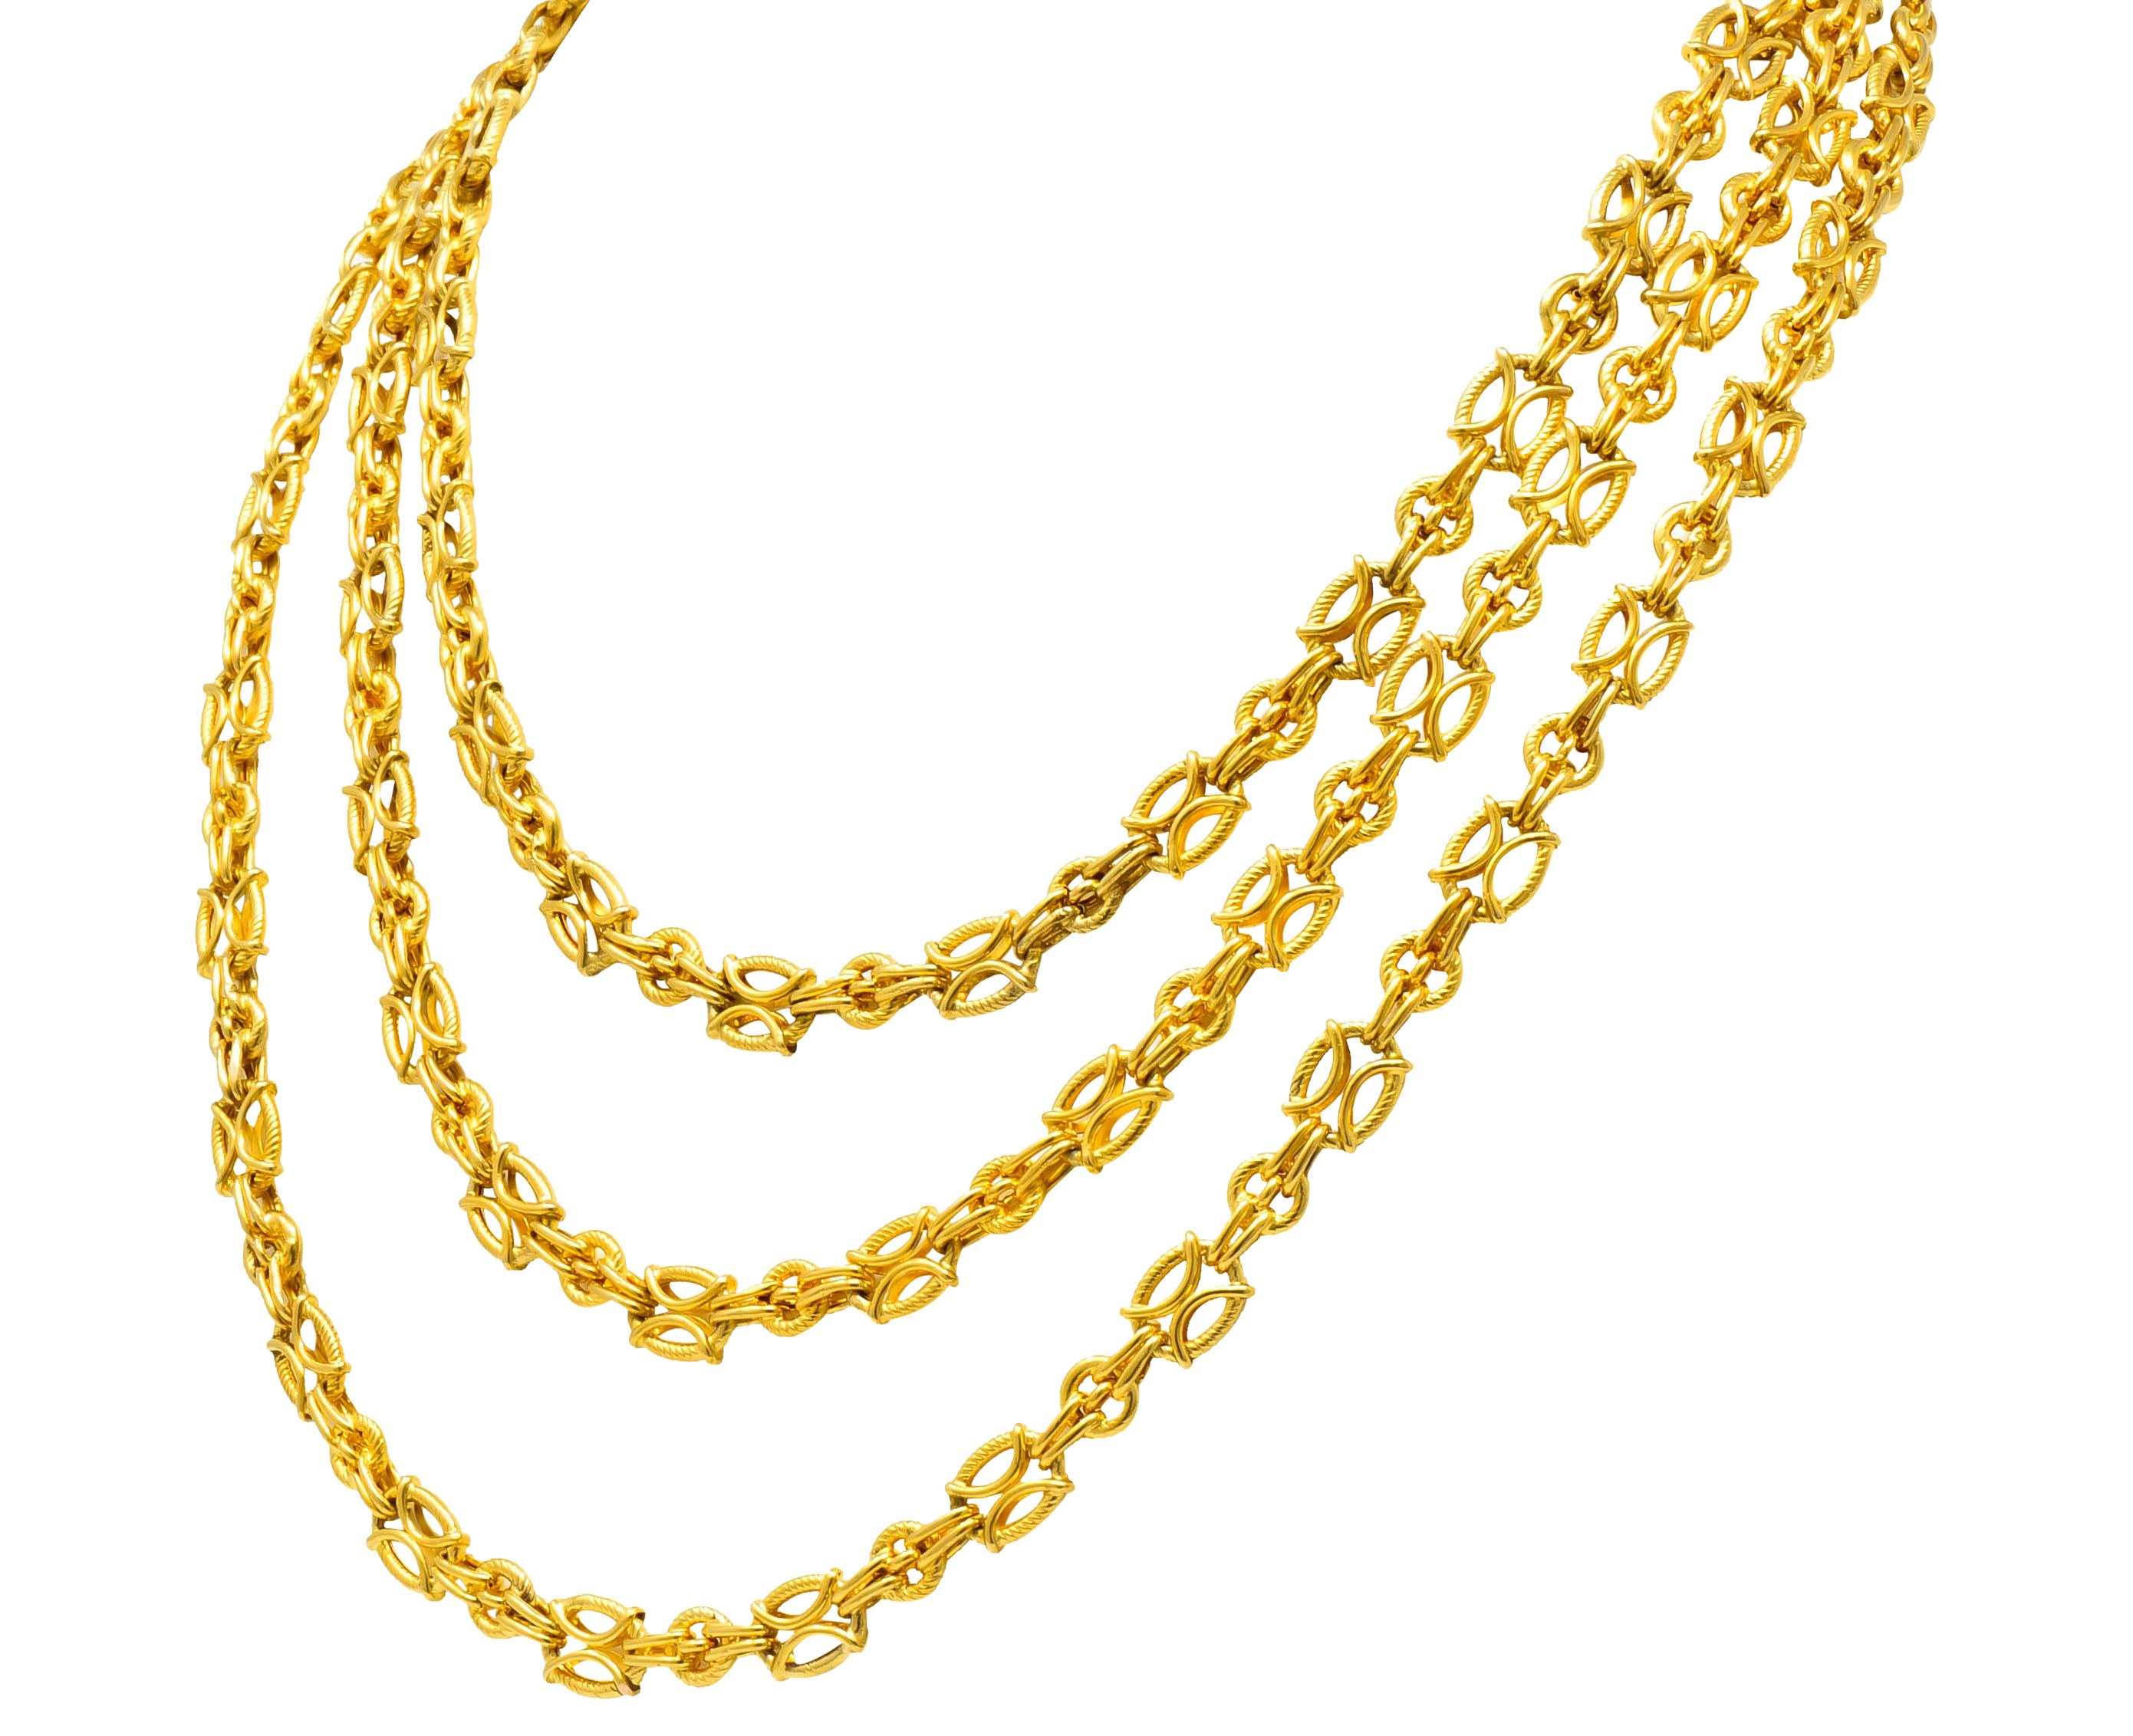 Necklace comprised of ribbed, oval links centering a polished gold hour glass motif alternating with smaller, round spacer links

Completed by spring ring clasp

Tested as 18 karat gold

Circa 1880's

Length: 53 inches

Width: 5/16 inch

Total